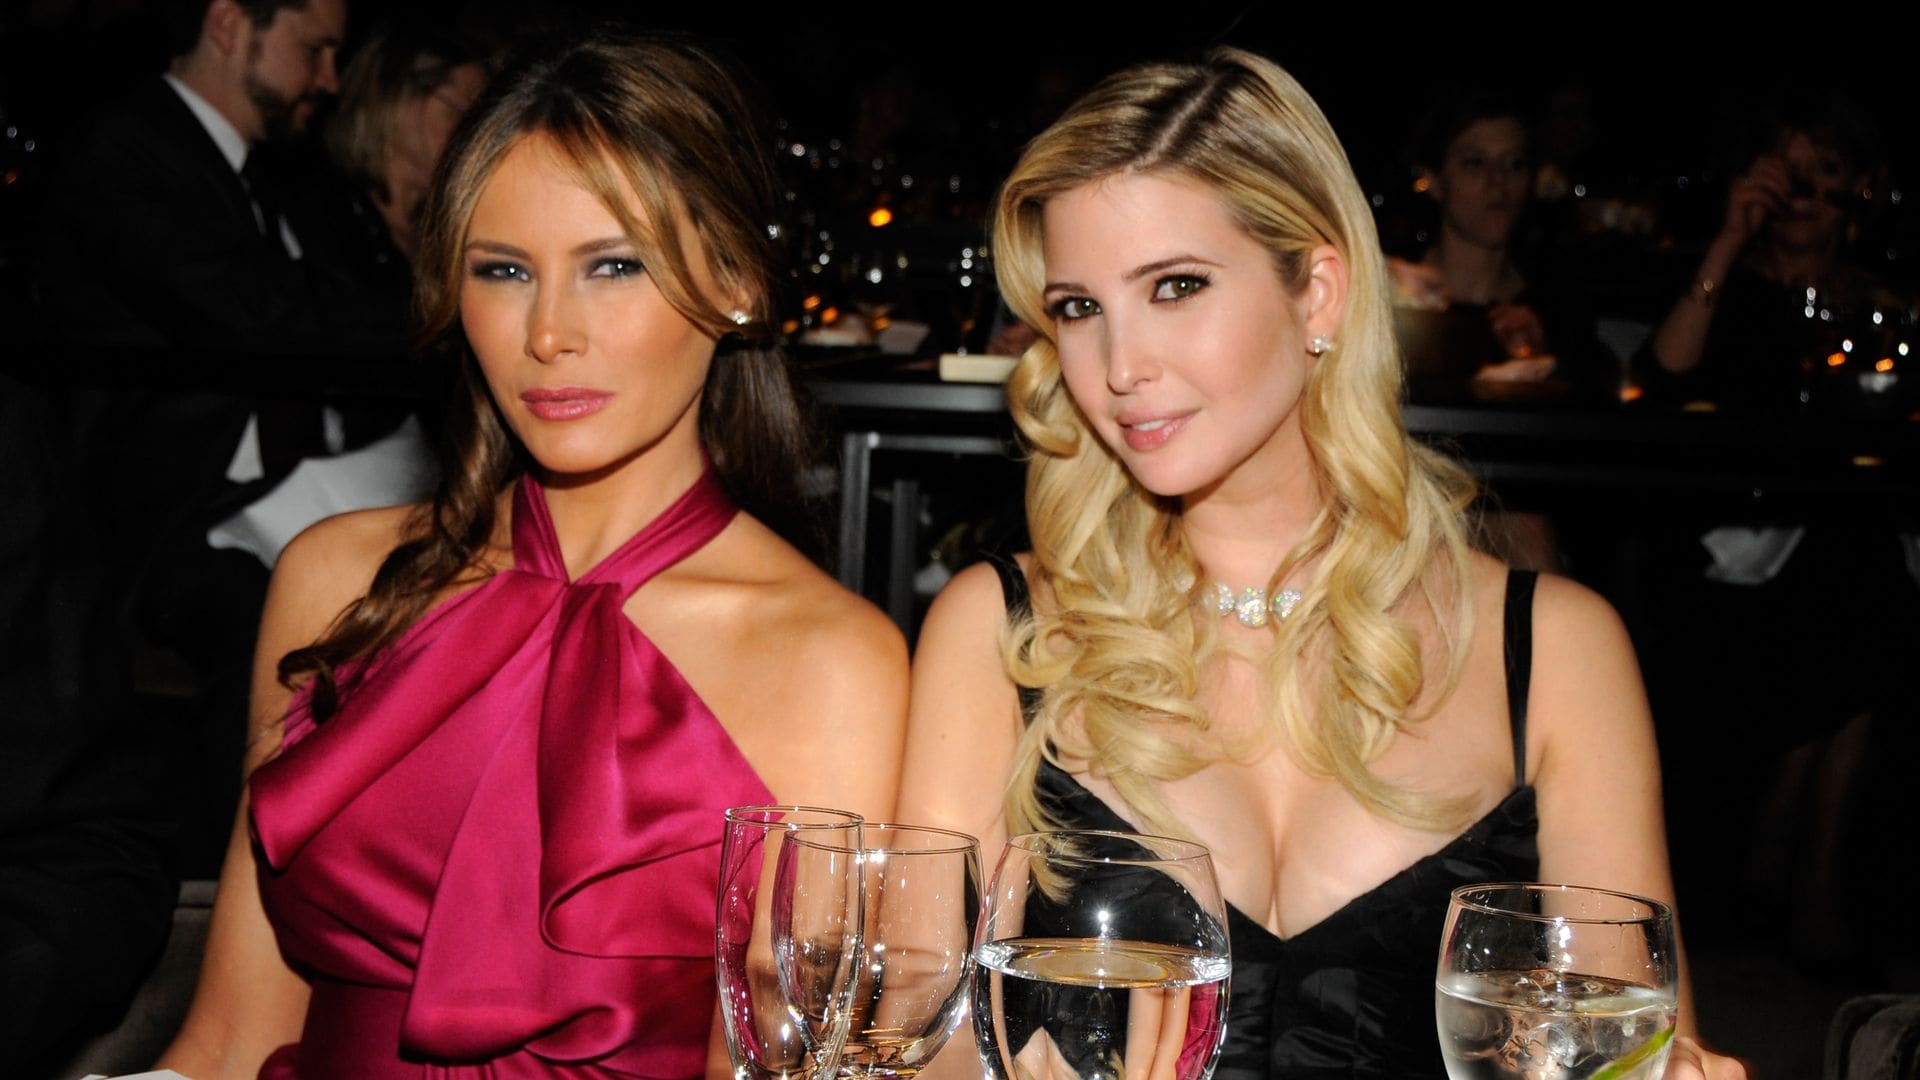 Ivanka and Melania Trump to join Eric and Tiffany Trump at RCN: "They’re coming in"